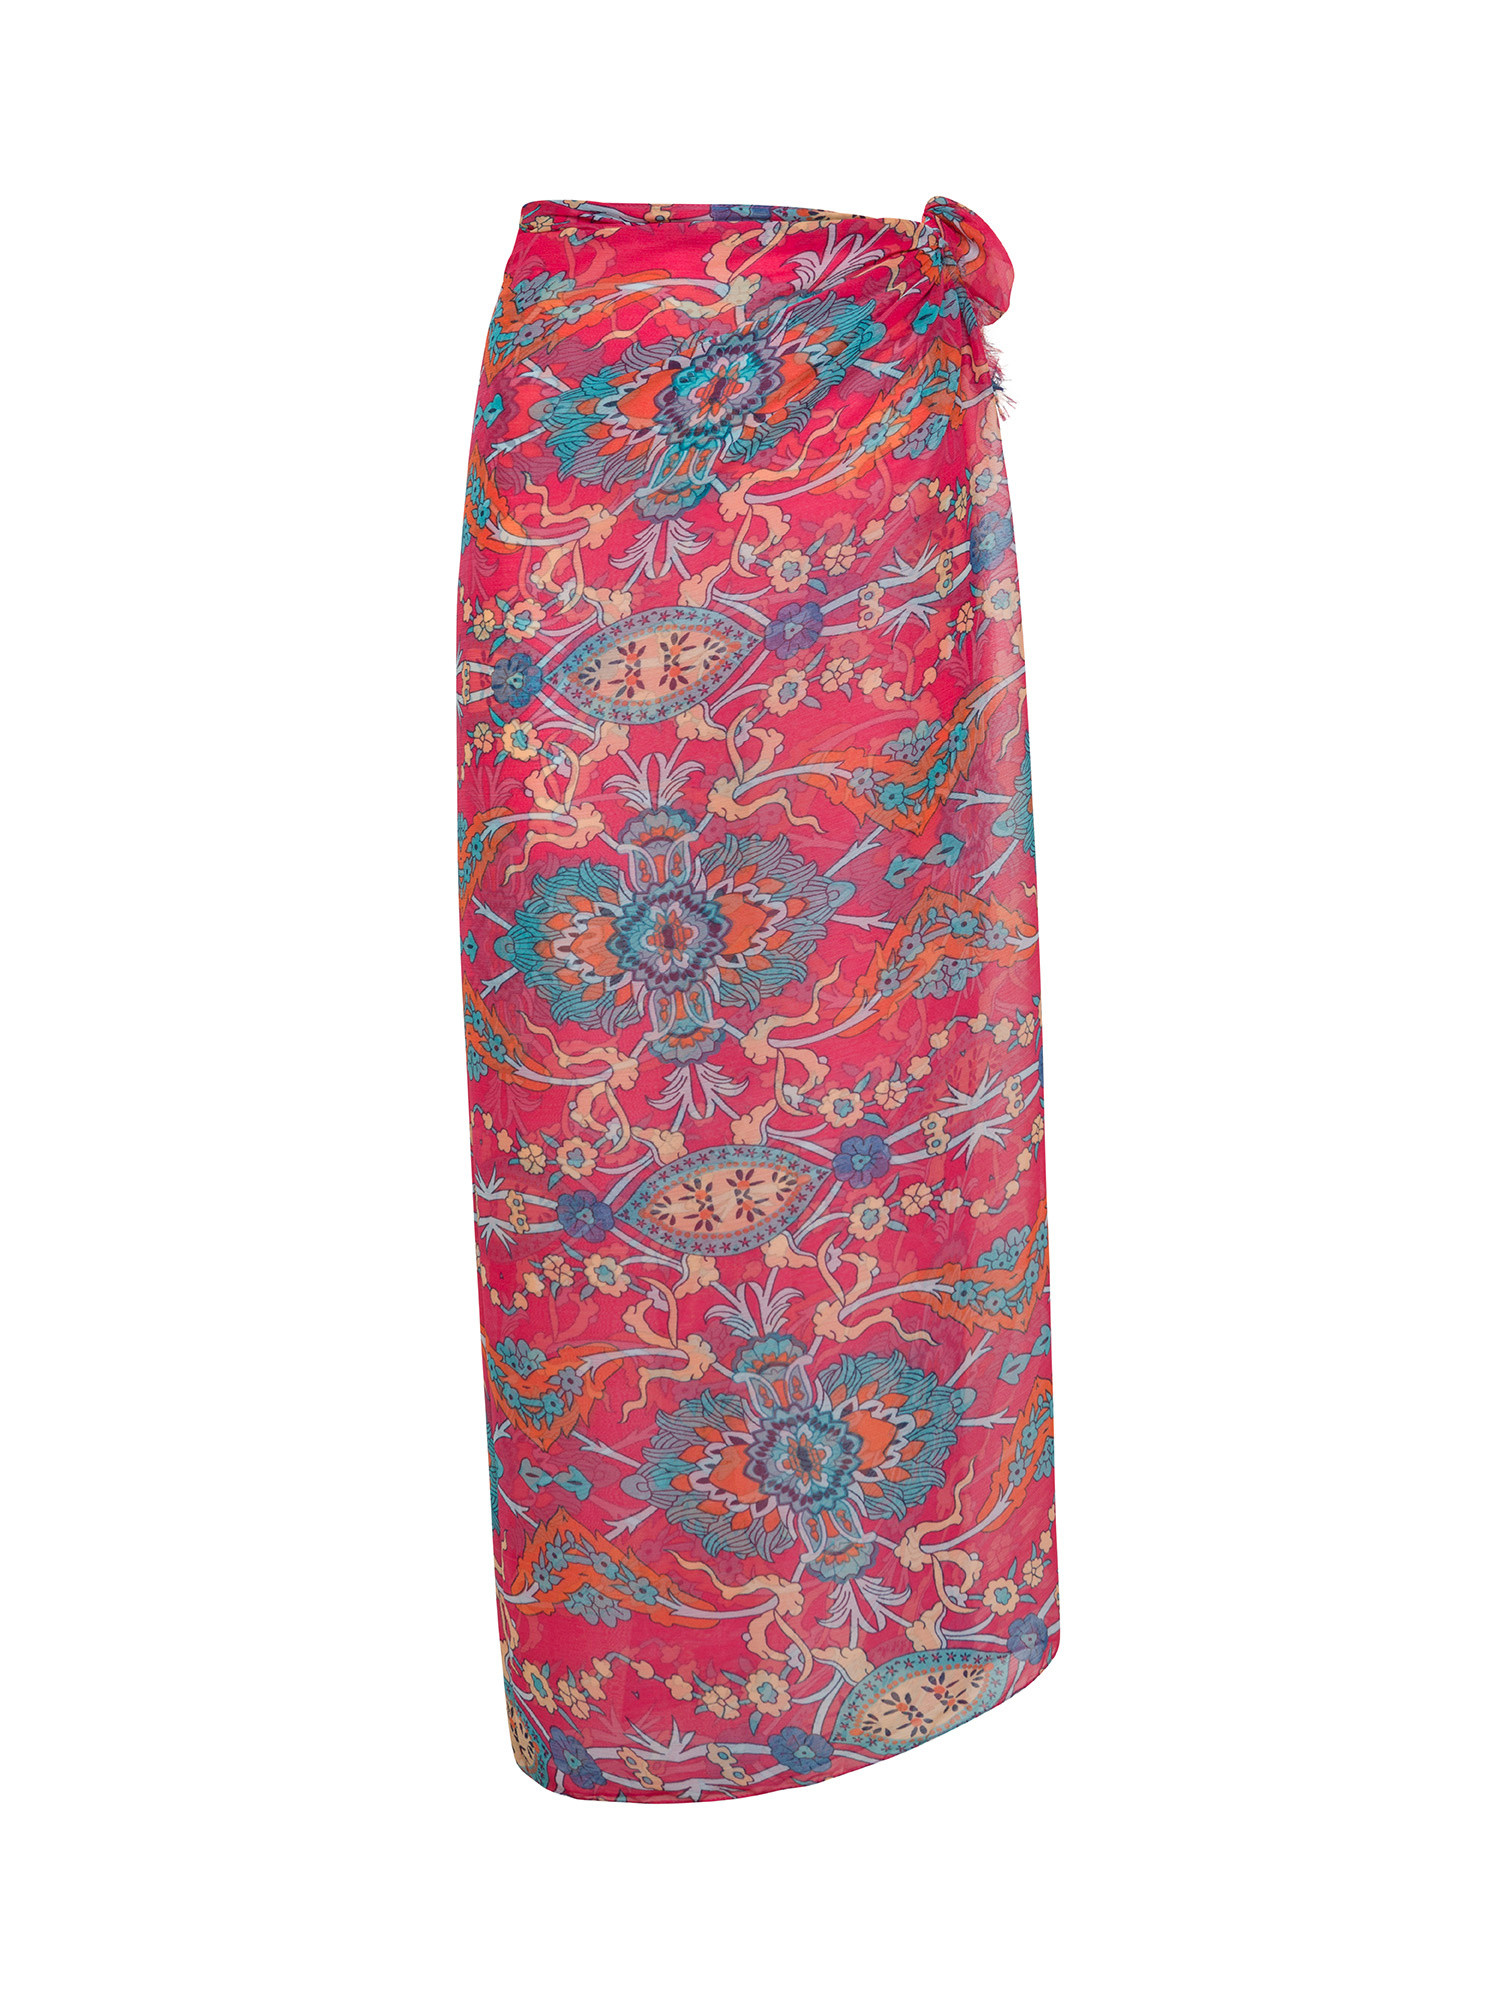 Koan - Sarong with floral print, Pink Fuchsia, large image number 0